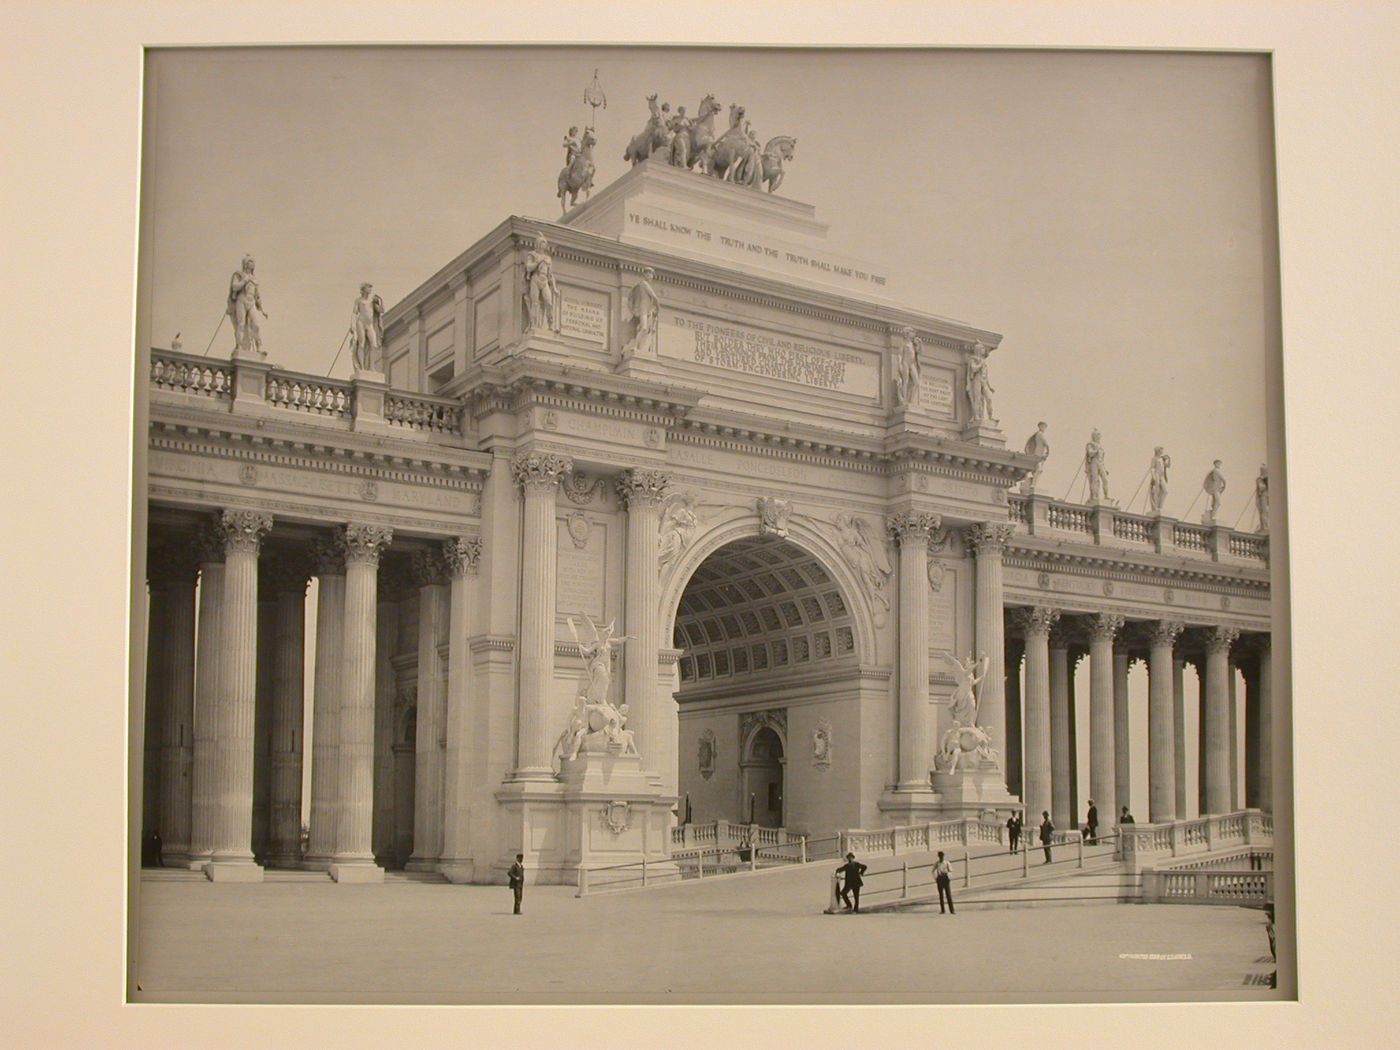 World's Columbian Exposition, Central Arch of Colonnade